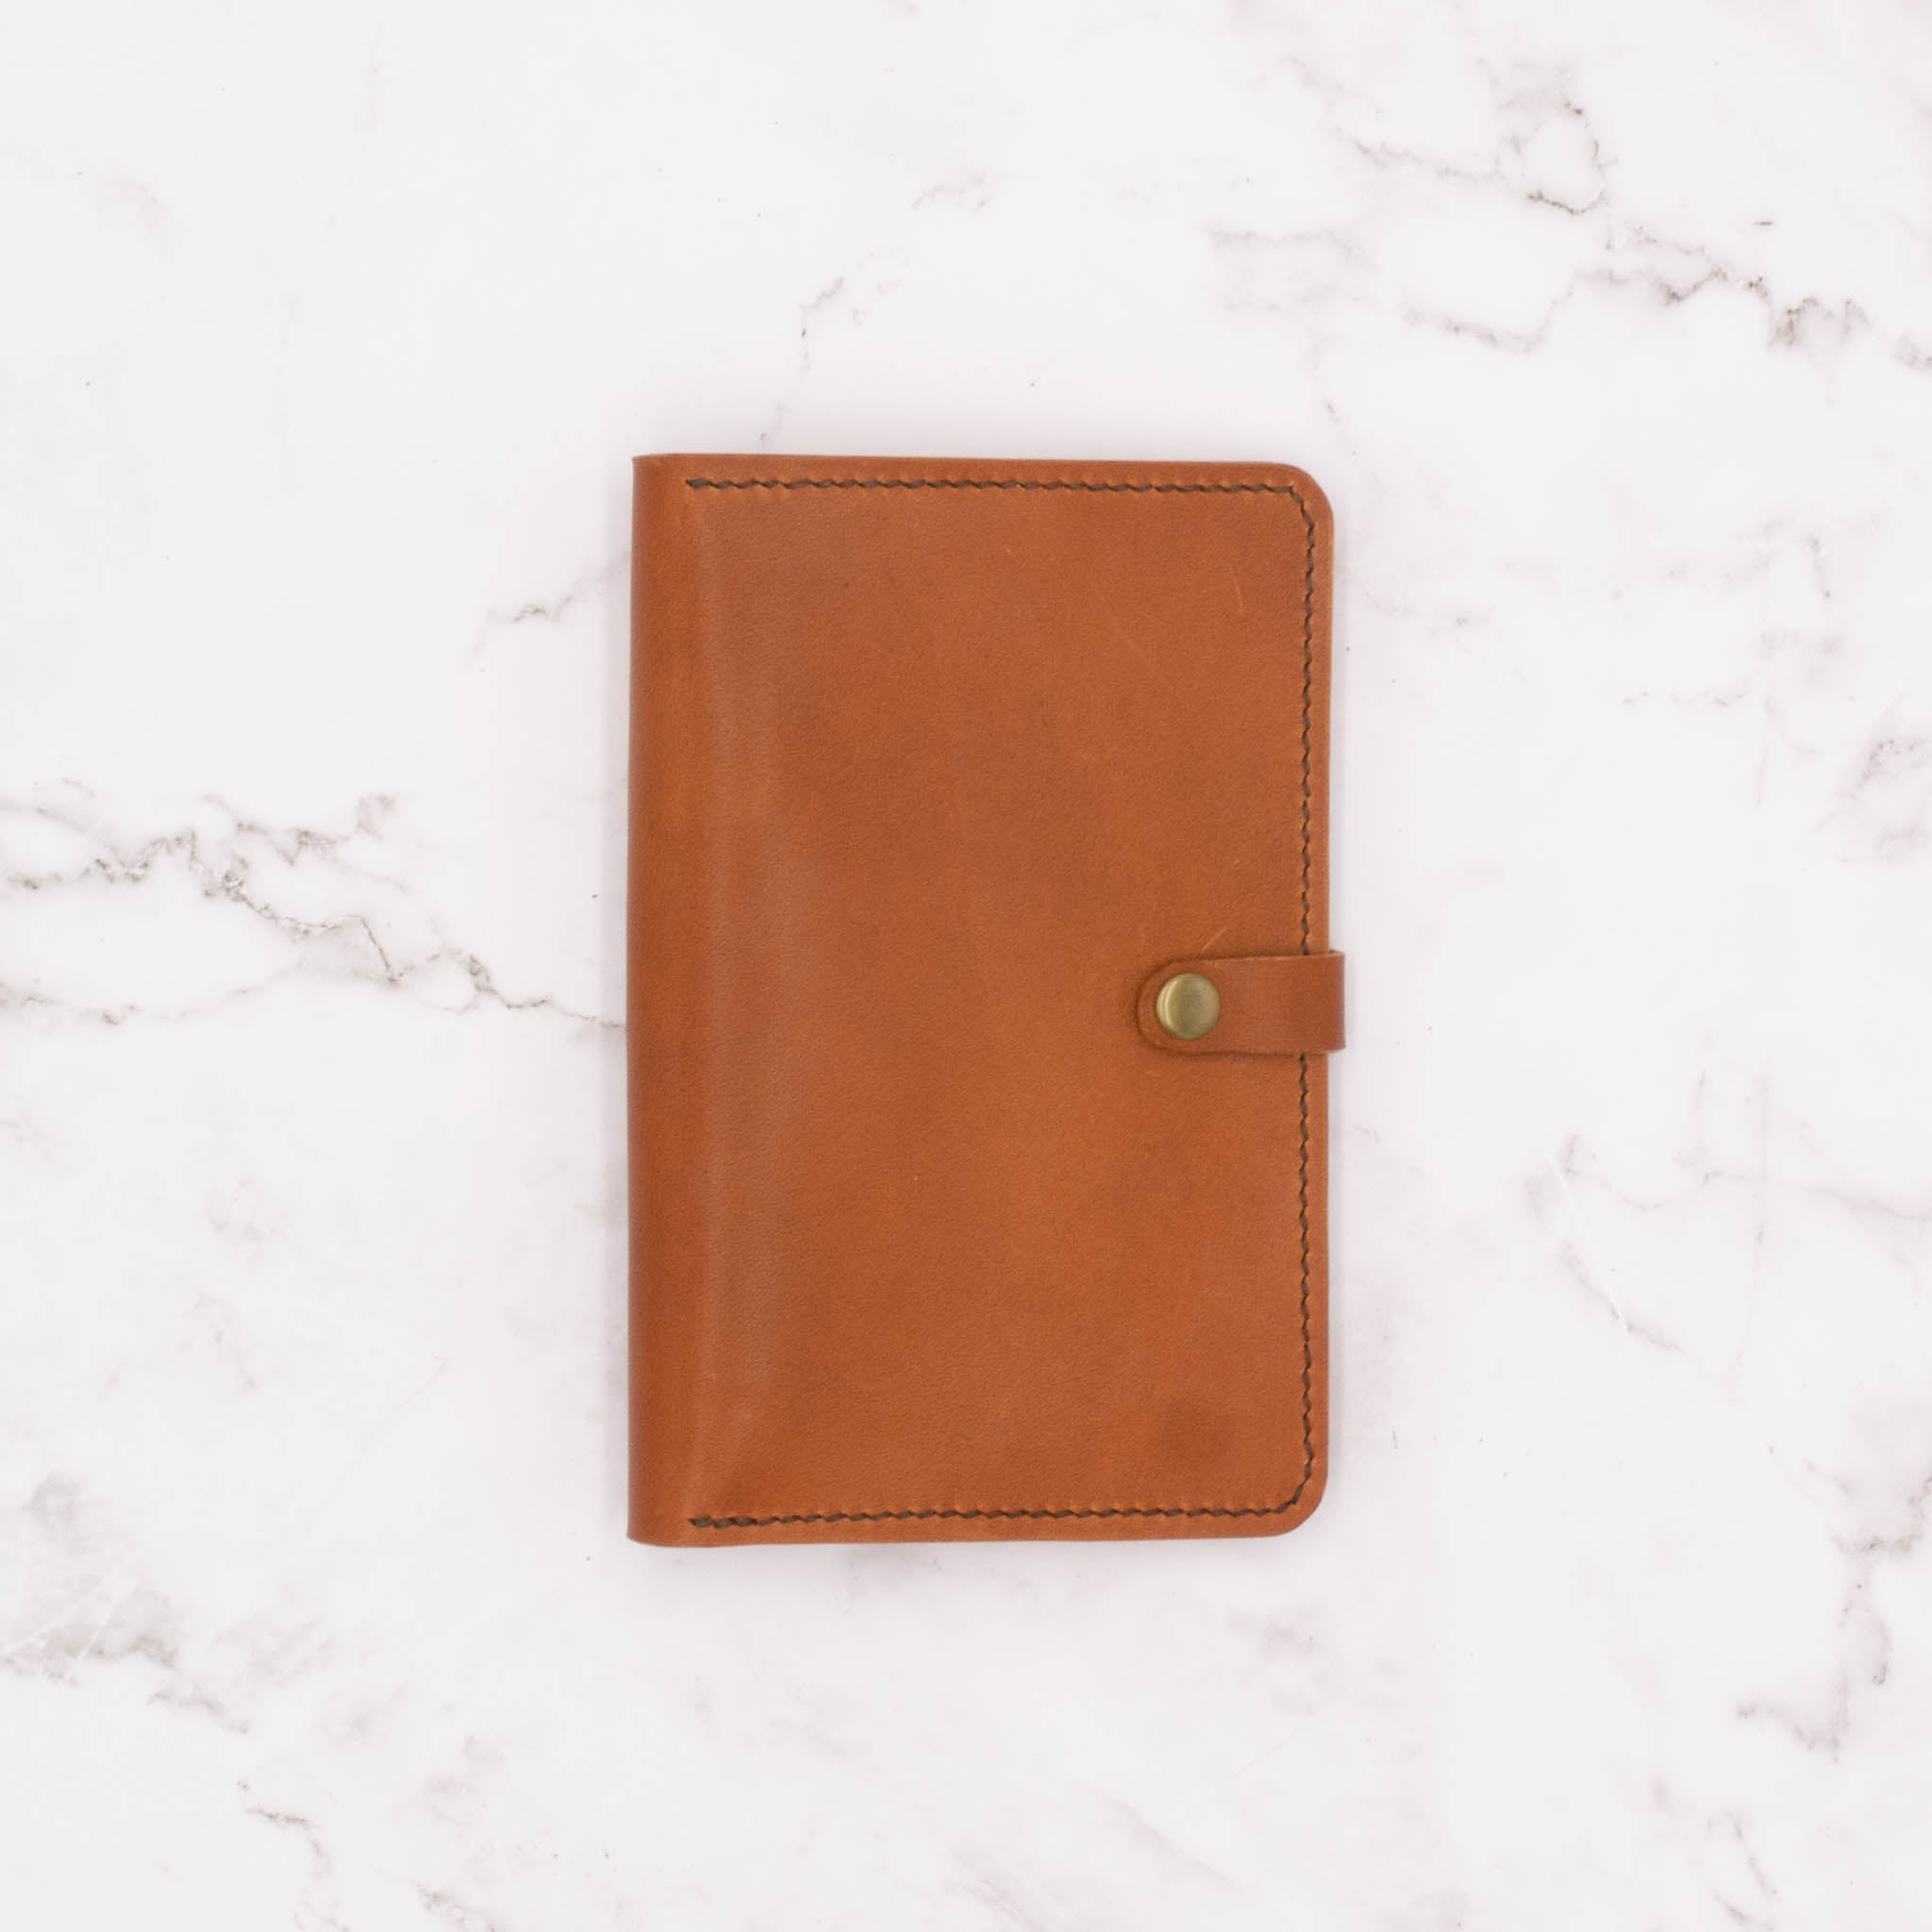 Leather Field Note / Passport Cover with Snap Closure - English Tan